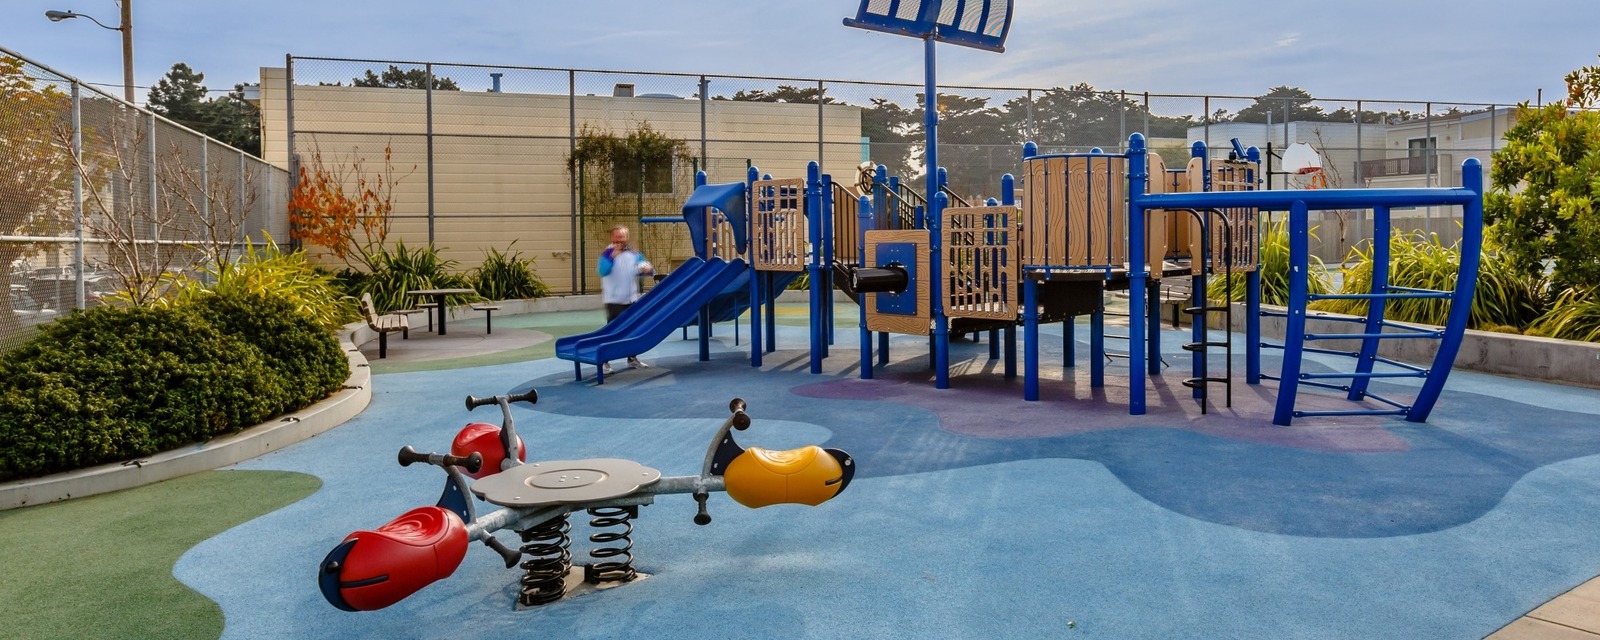 Play Grounds in Bay Area Feature Image